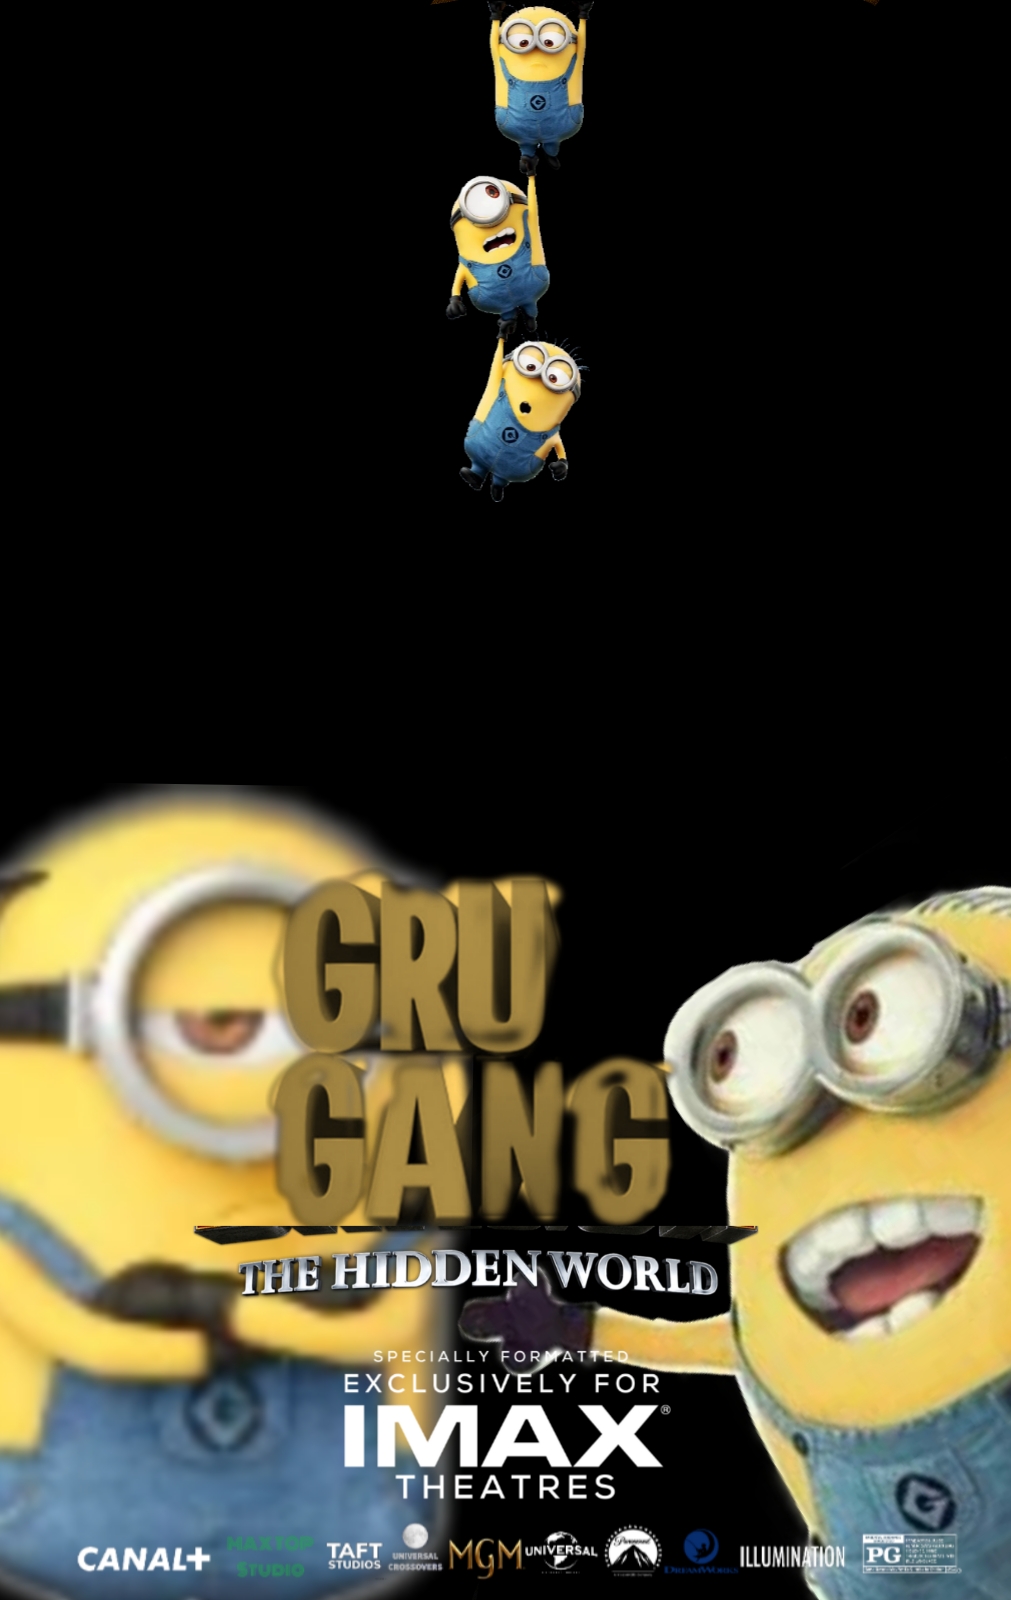 GGTHW Minions Poster by maxtop9002 on DeviantArt